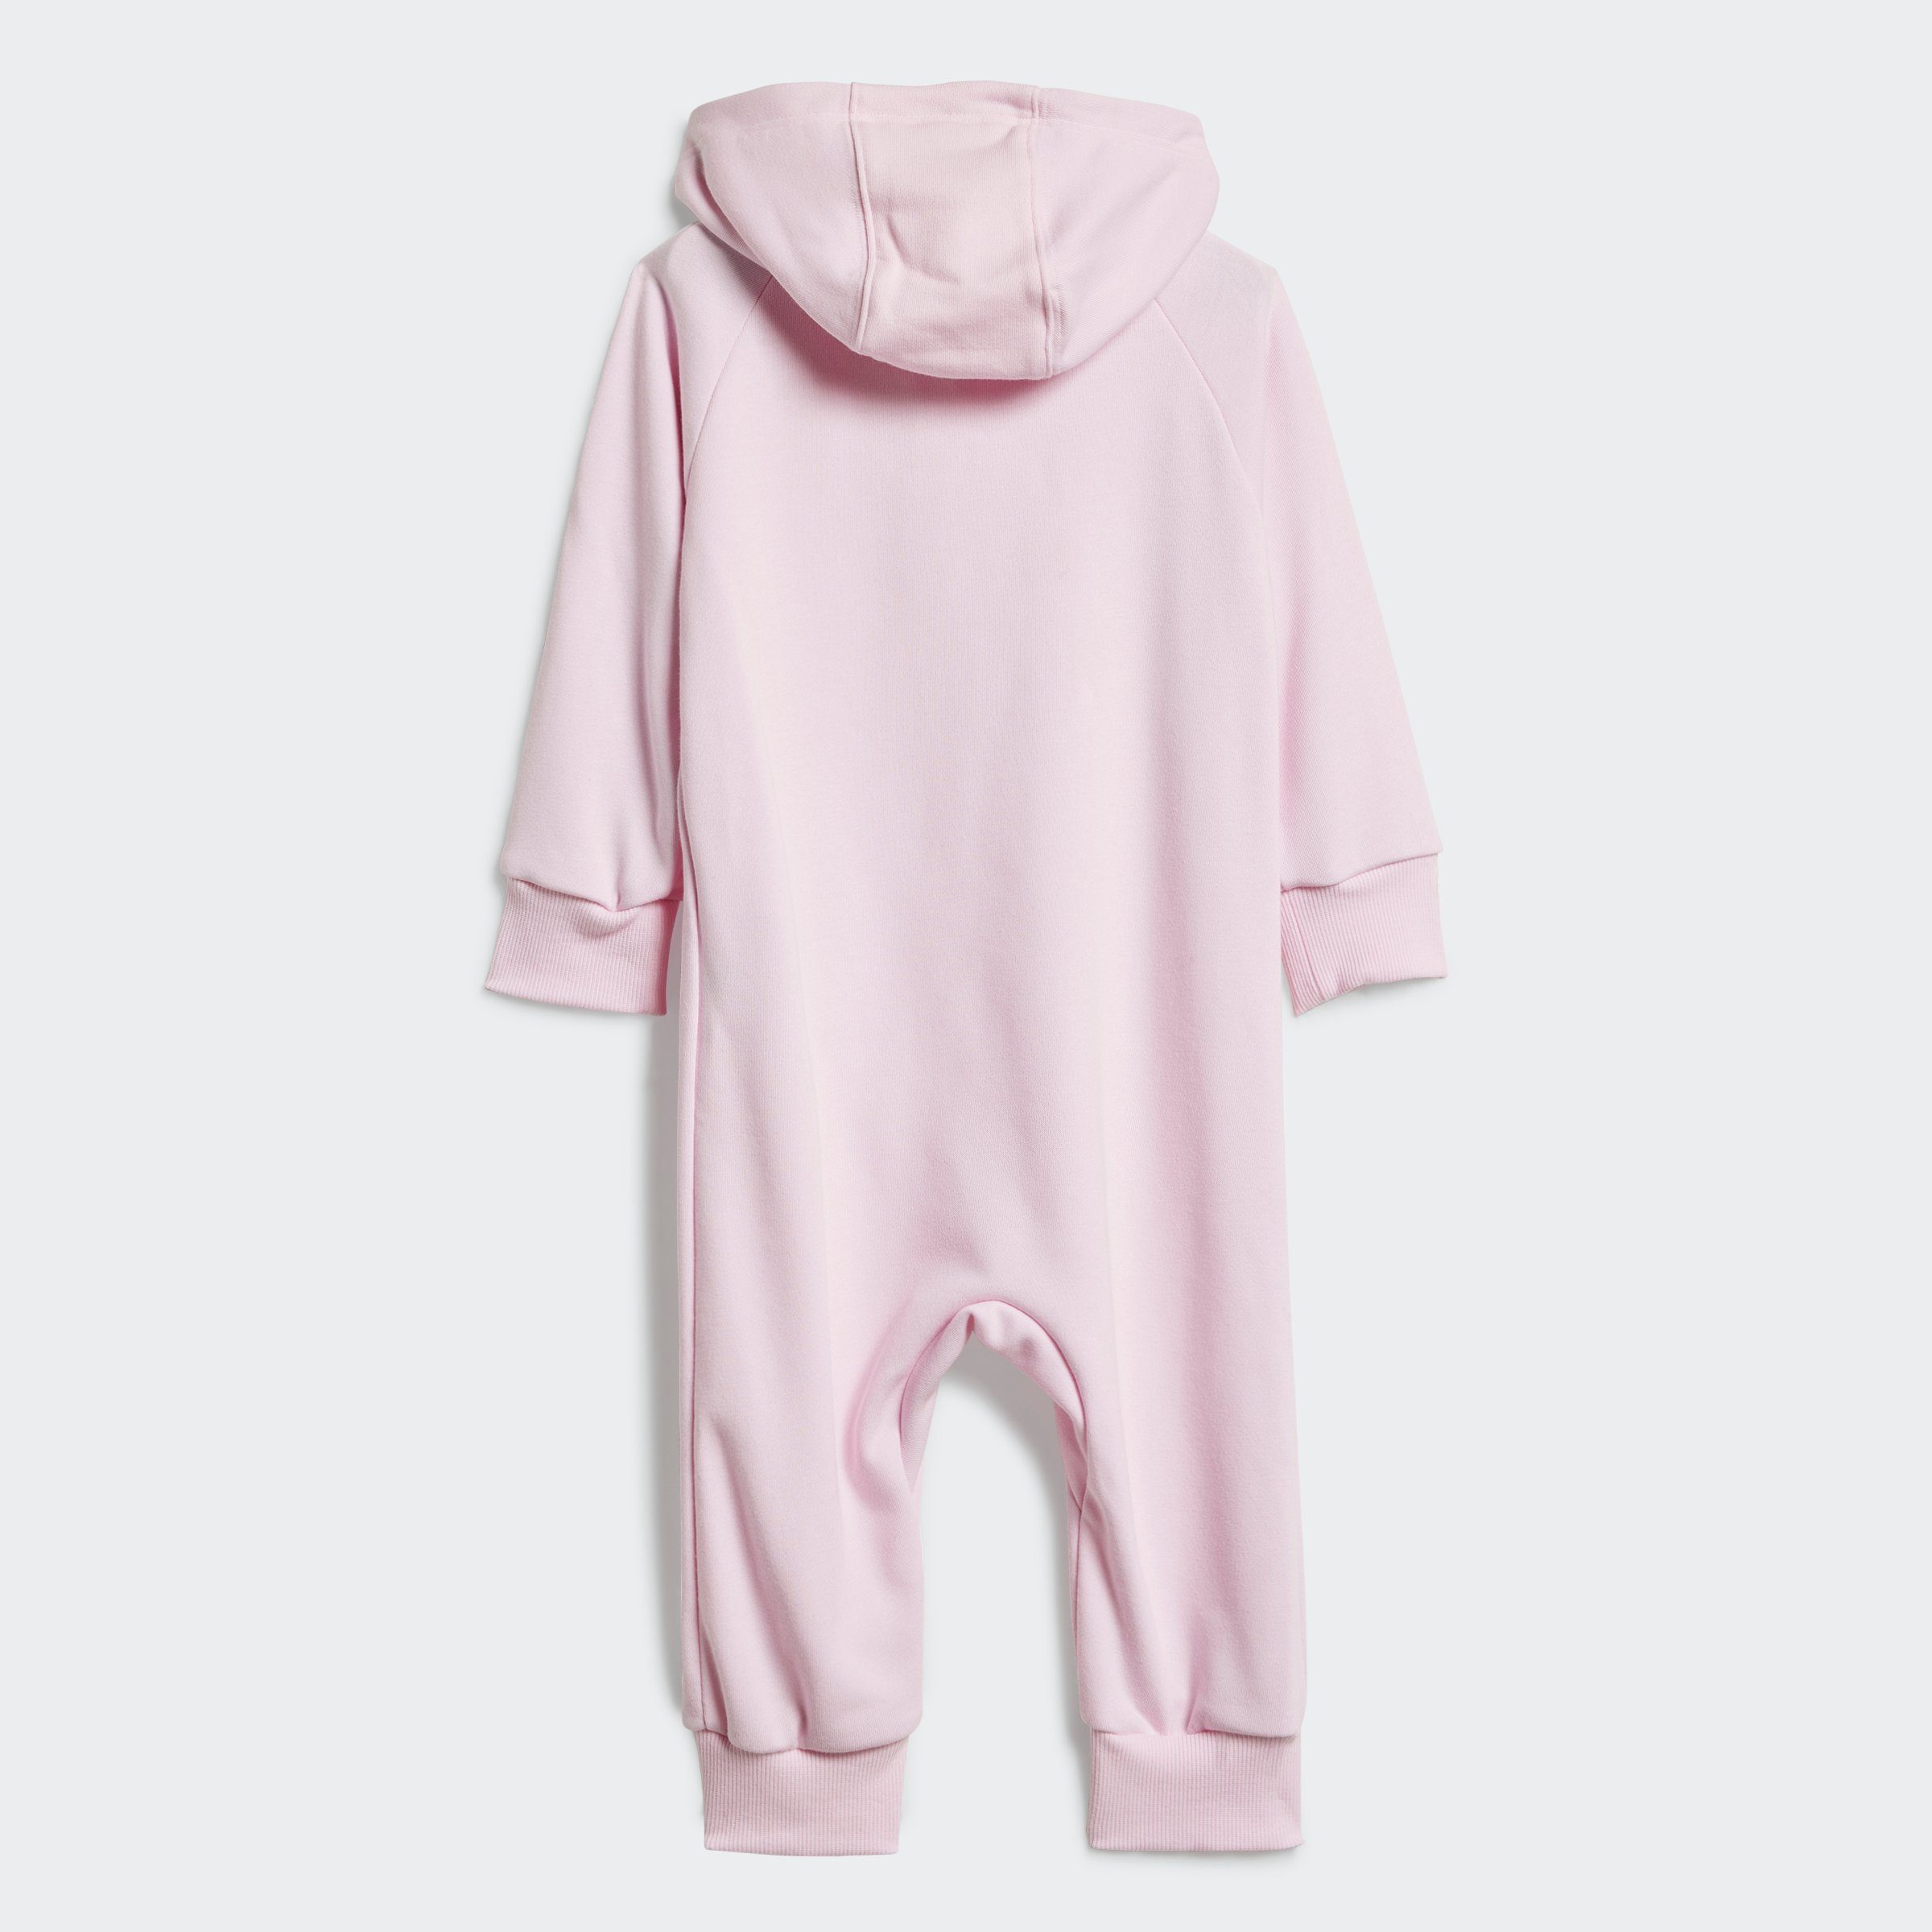 White 3S Clear I ONESIE adidas / FT Overall Sportswear Pink